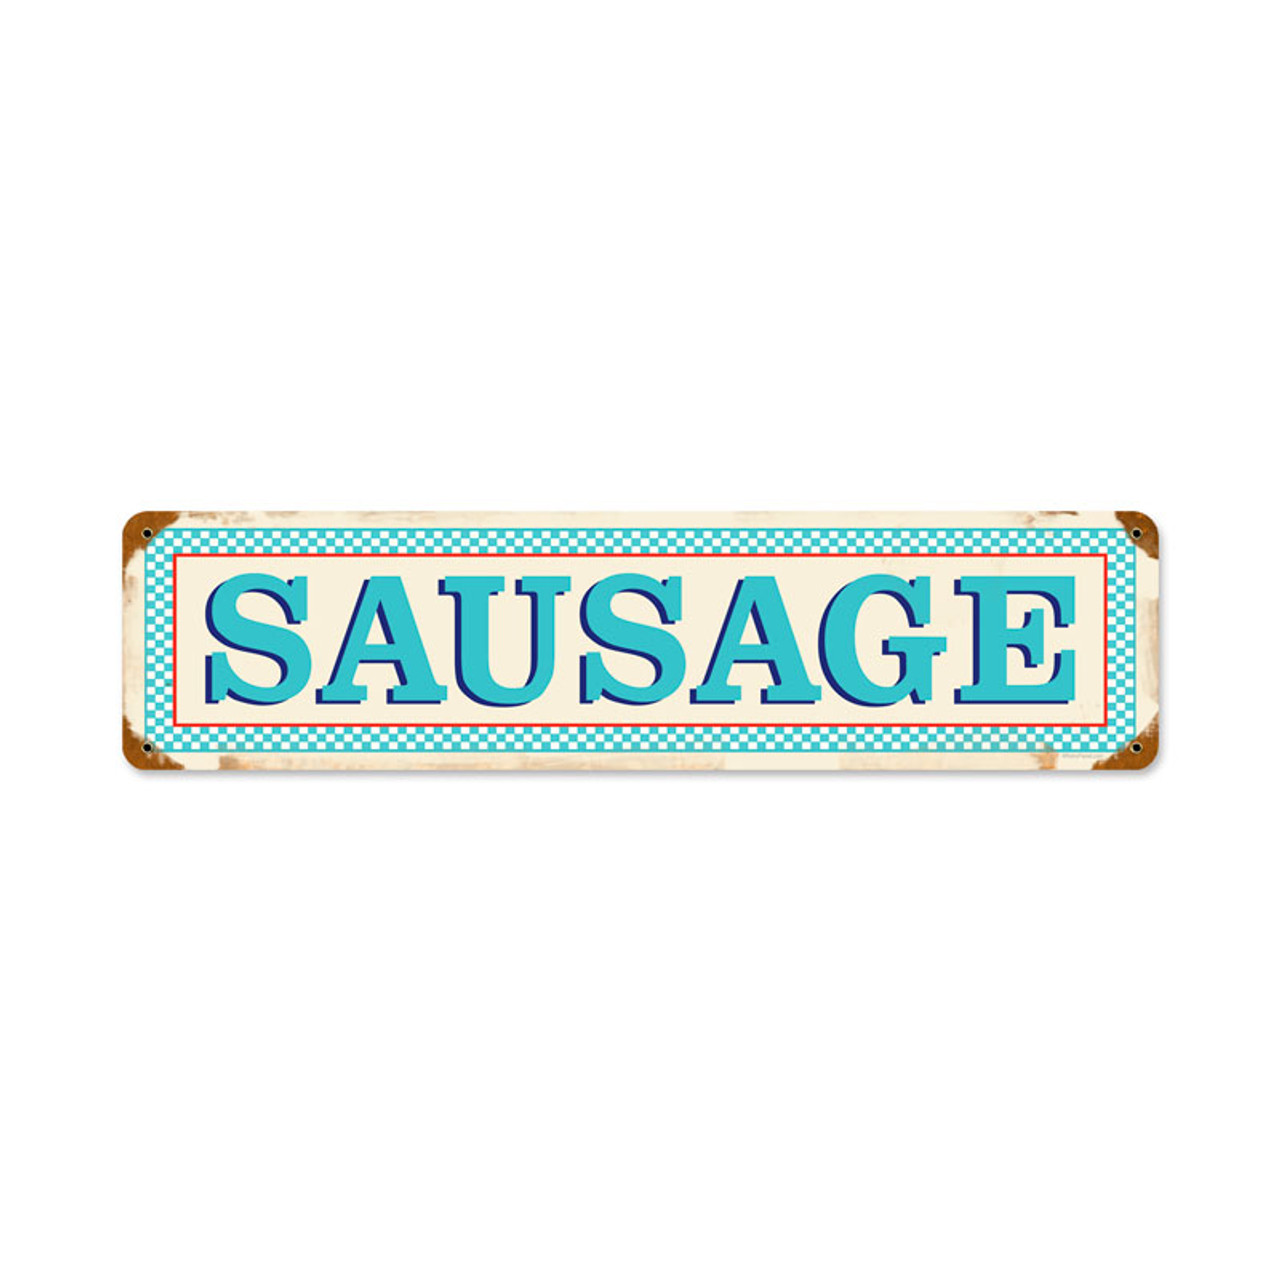 Blue Sausage Vintage Metal Sign 20 x 5 Inches